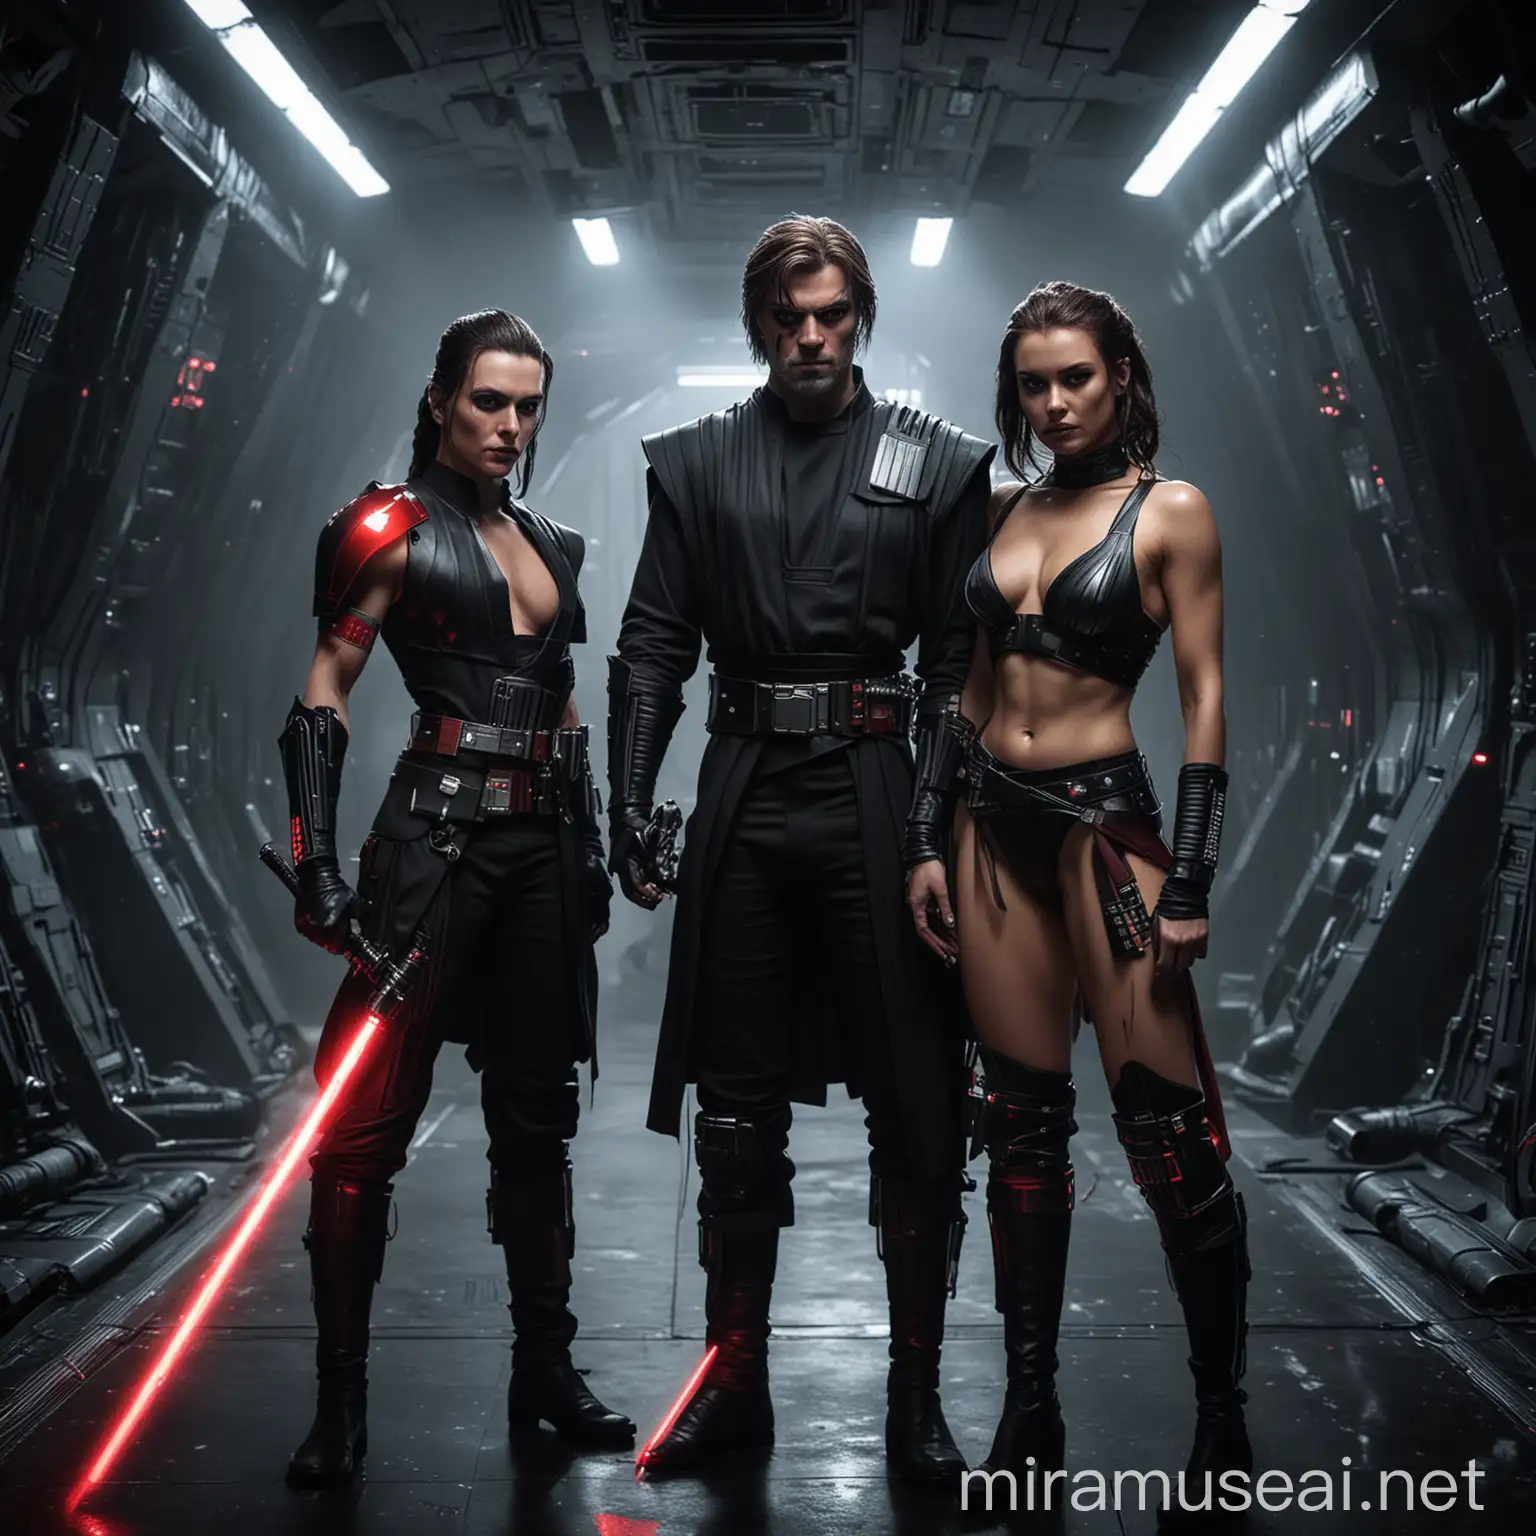 Sinister Sith Lords with Drawn Lightsabers in Dark Spaceship Setting